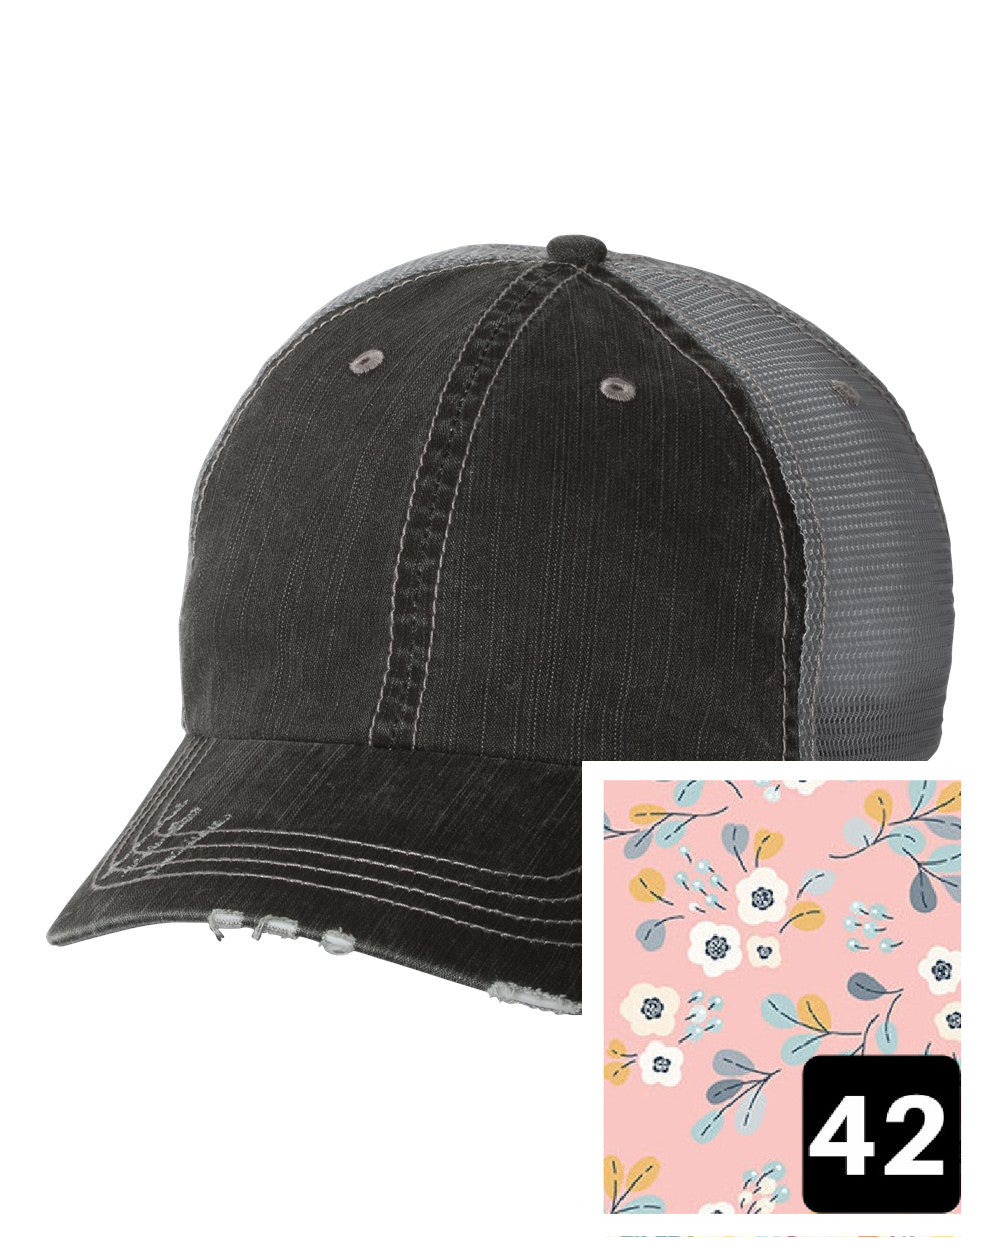 gray distressed trucker hat with light blue and pink mosaic fabric state of California